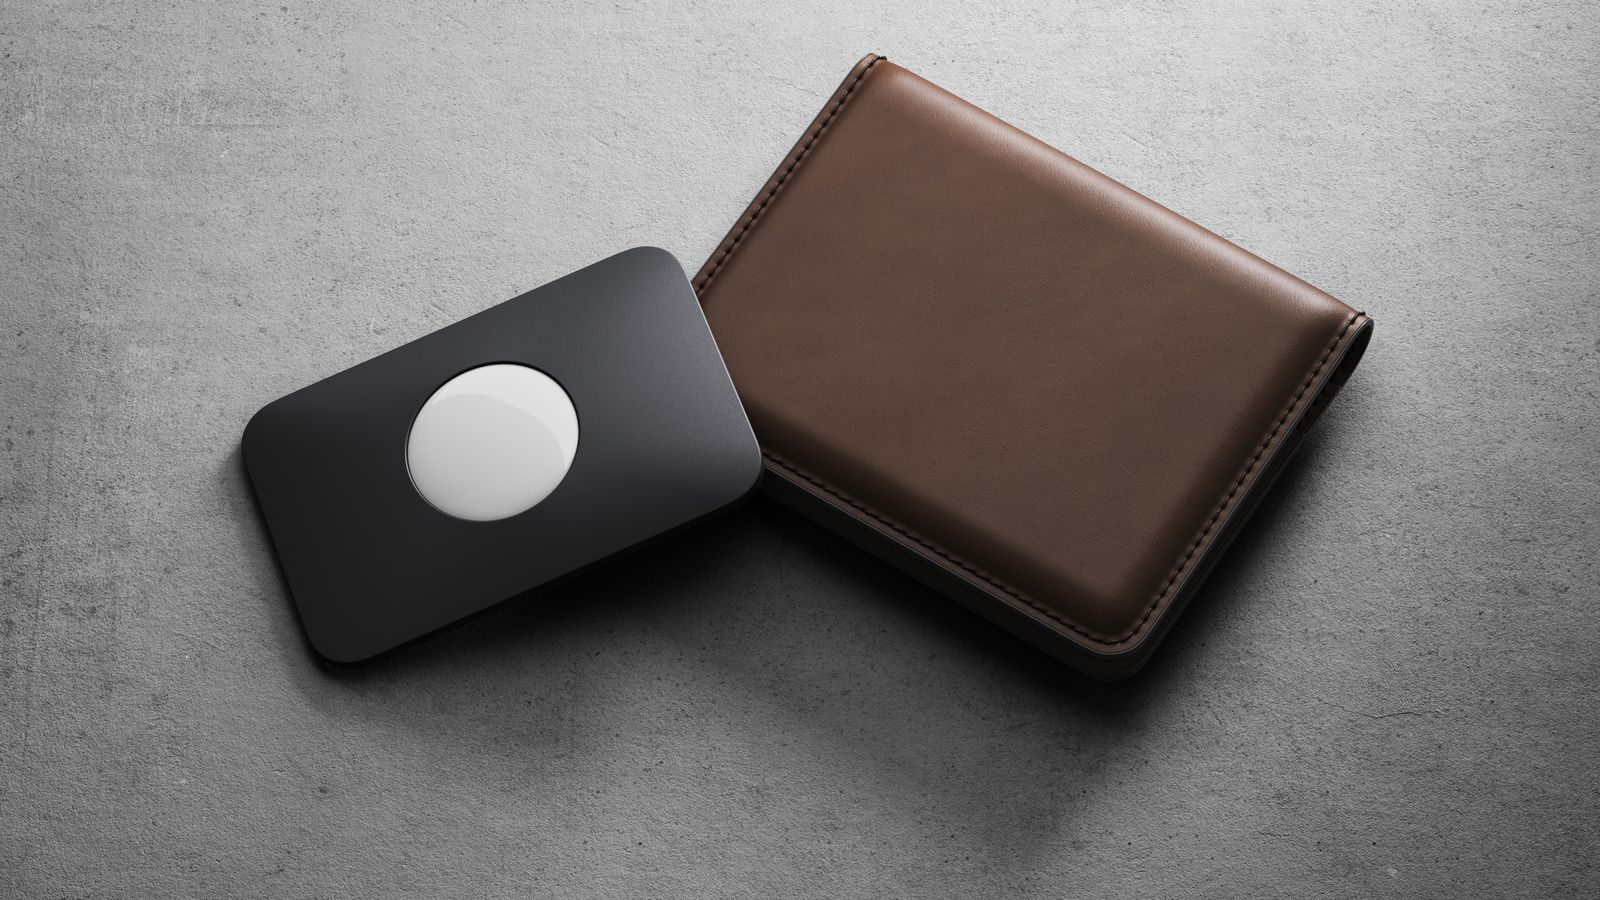 Video: This Clever Hack Turns AirTag into a Thin Card for Your Wallet